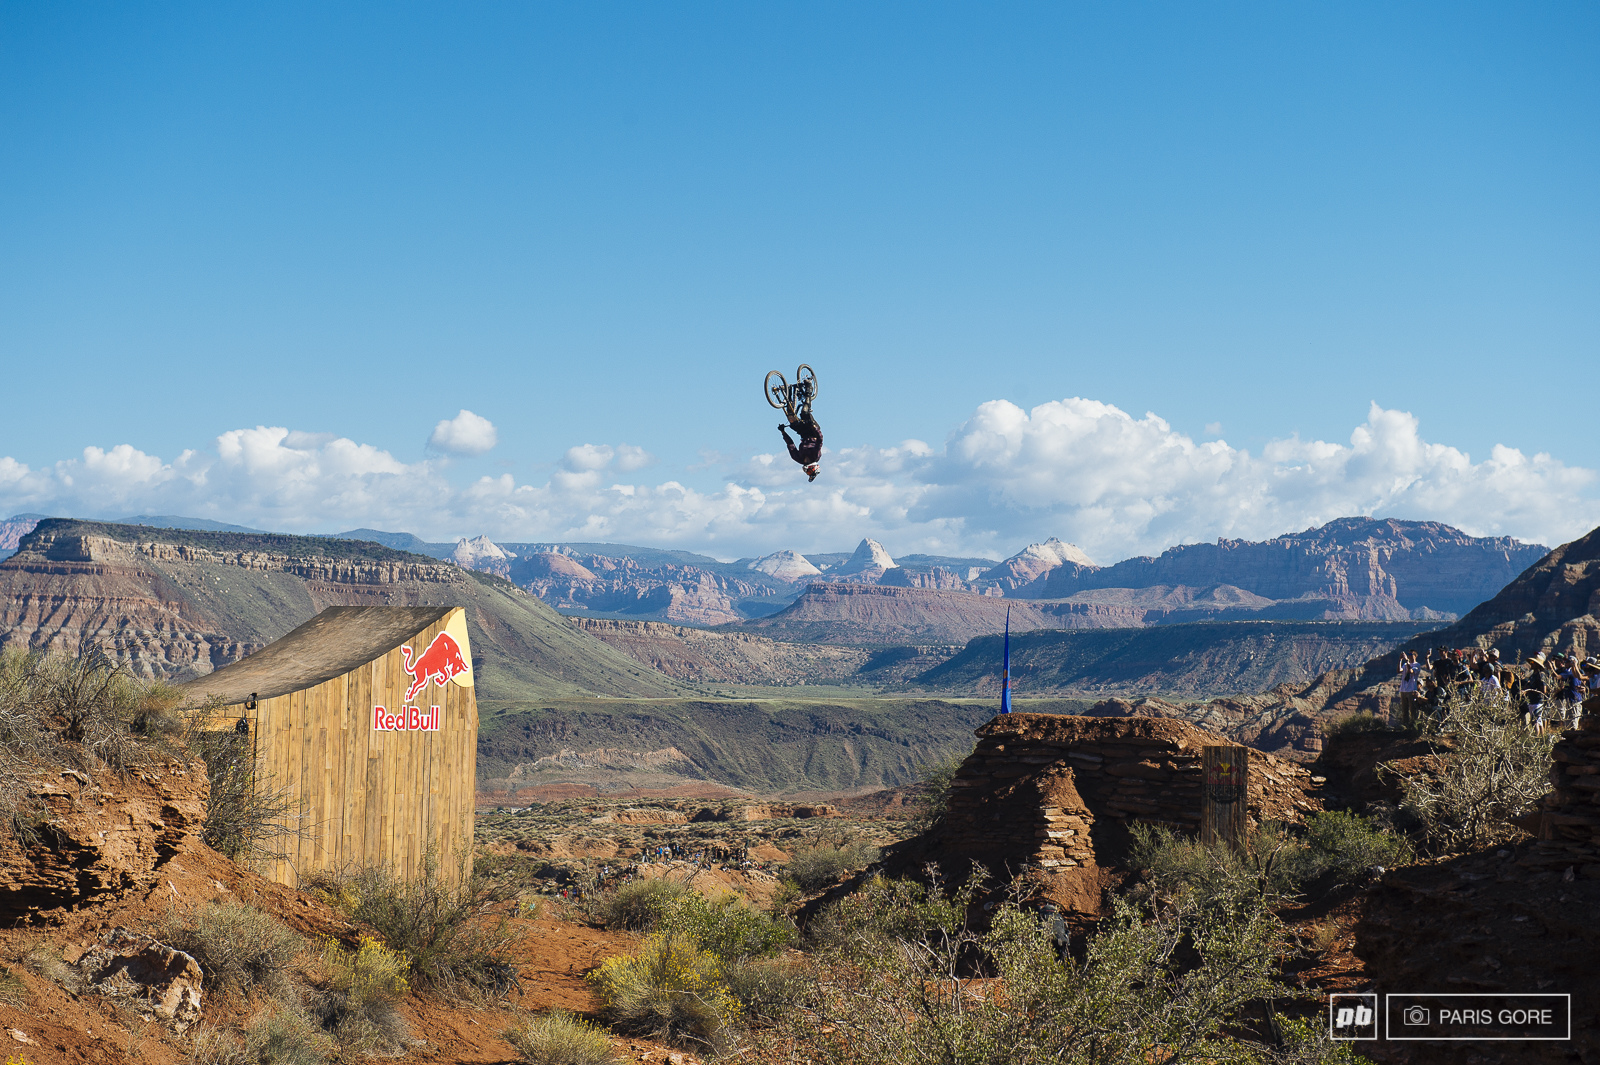 Herb back flip on the canyon gap.